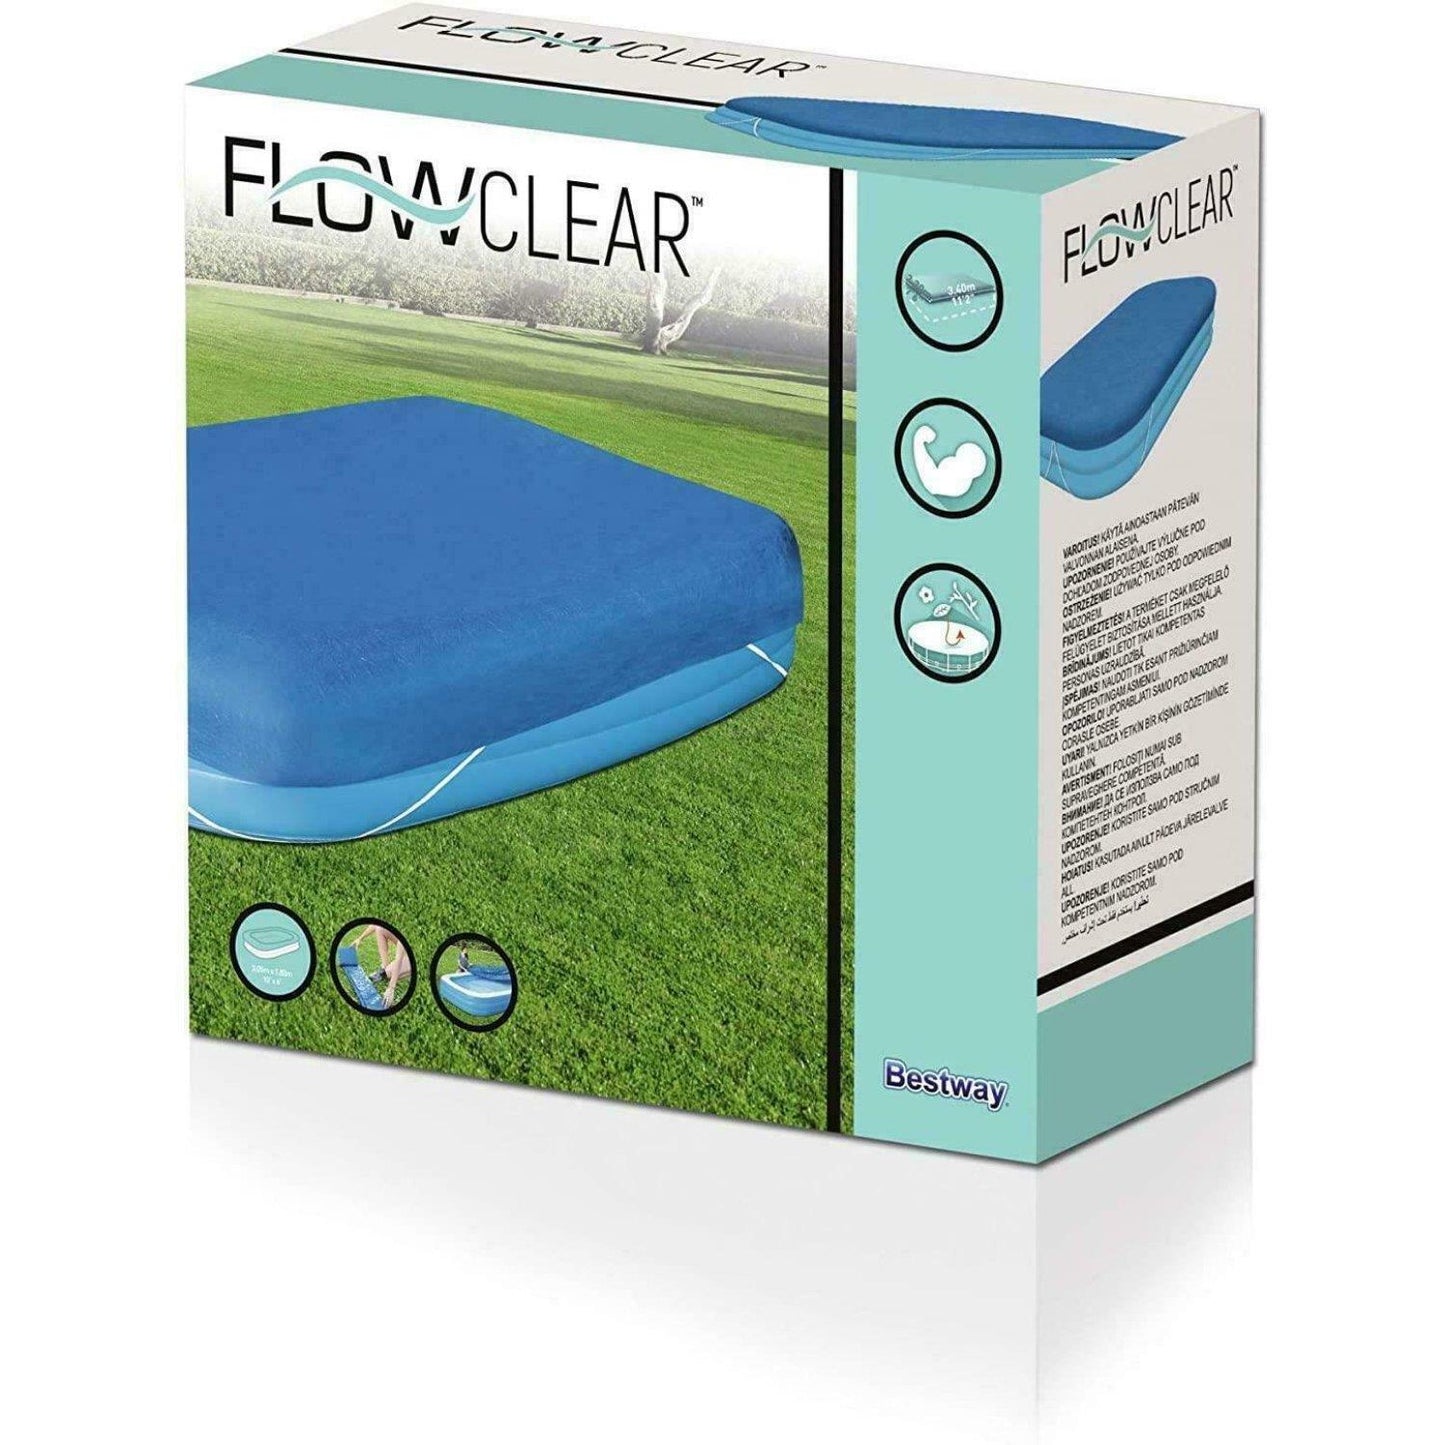 Bestway Flow Clear Rectangle Pool Covers 8.5 ft by Bestway - UKBuyZone